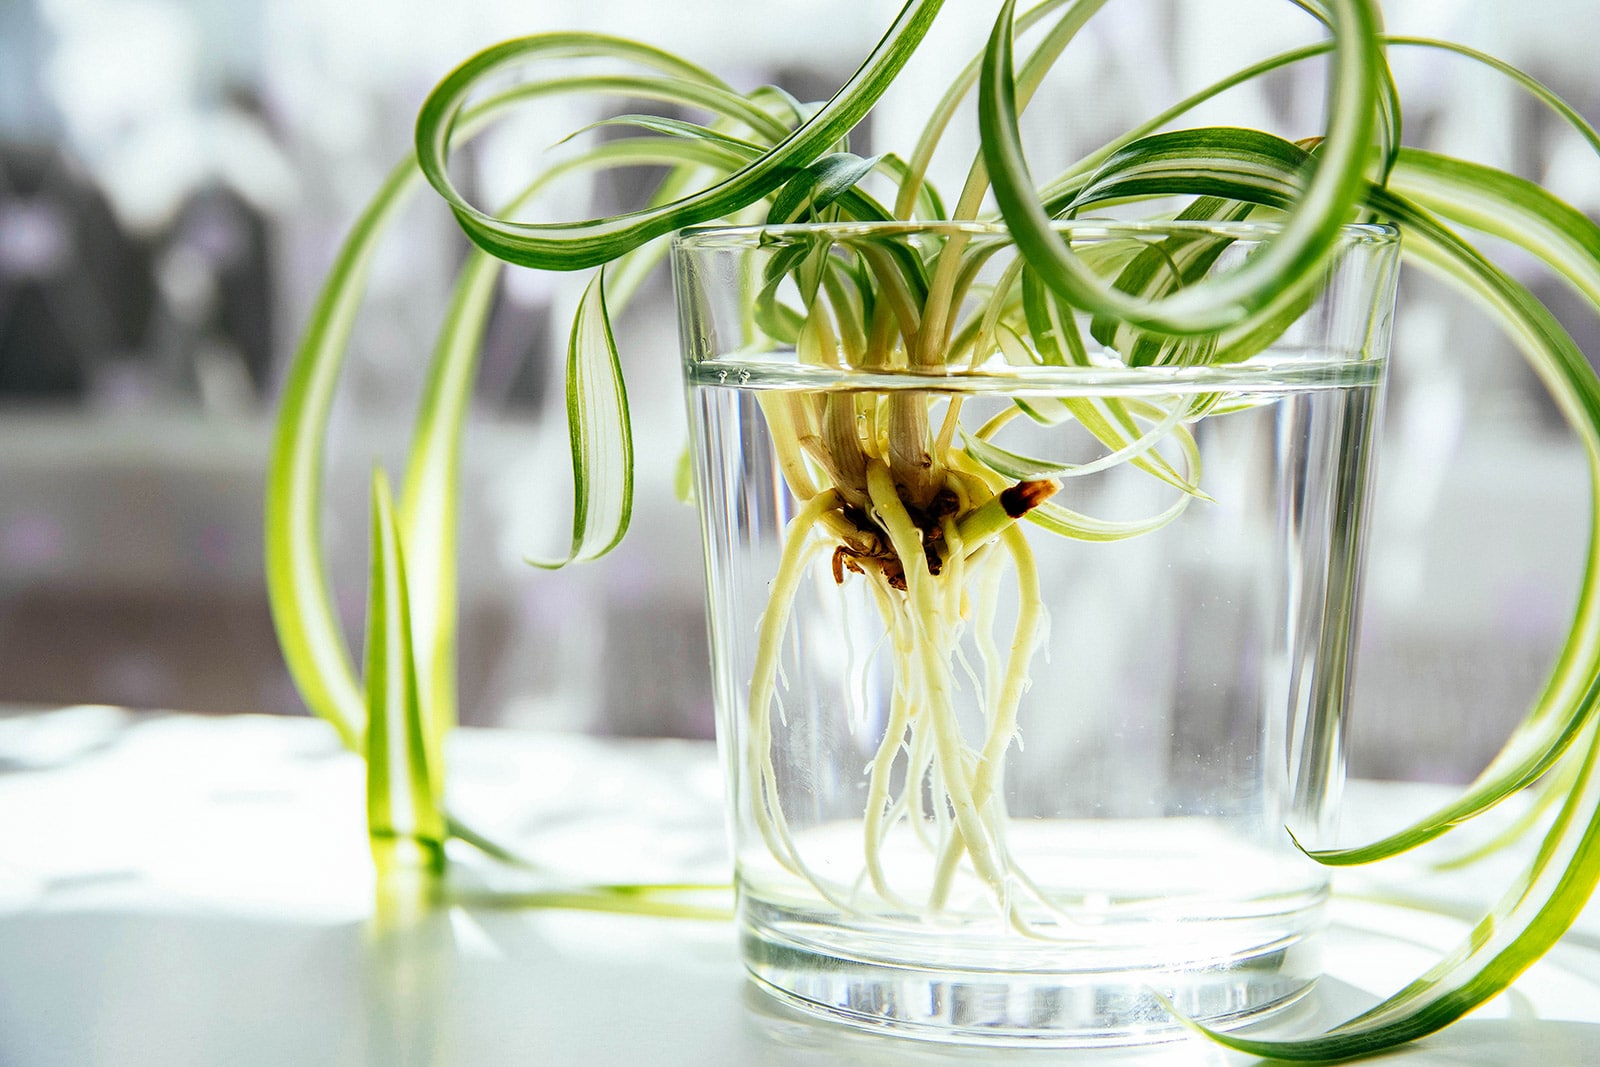 Spider plant pup (spider ivy or airplane plant) being rooted in a glass of water with long roots forming